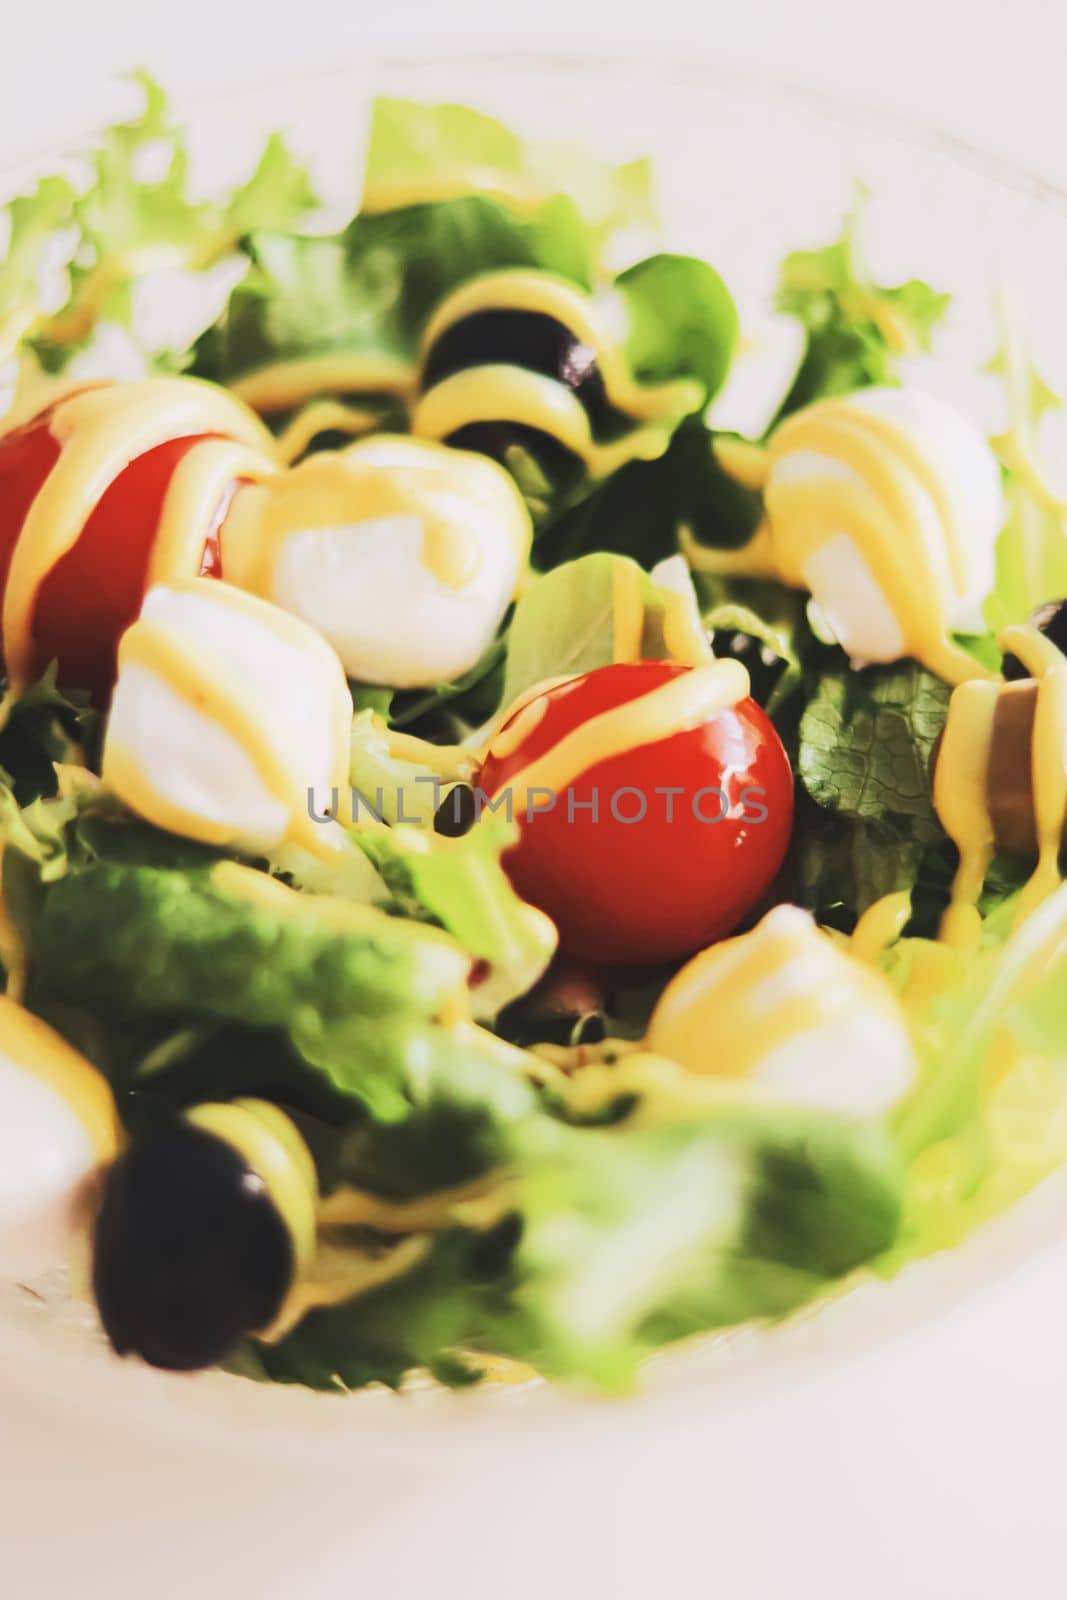 Food and diet, salad with fresh vegetables and mozzarella cheese as meal for lunch or dinner, tasty recipe by Anneleven